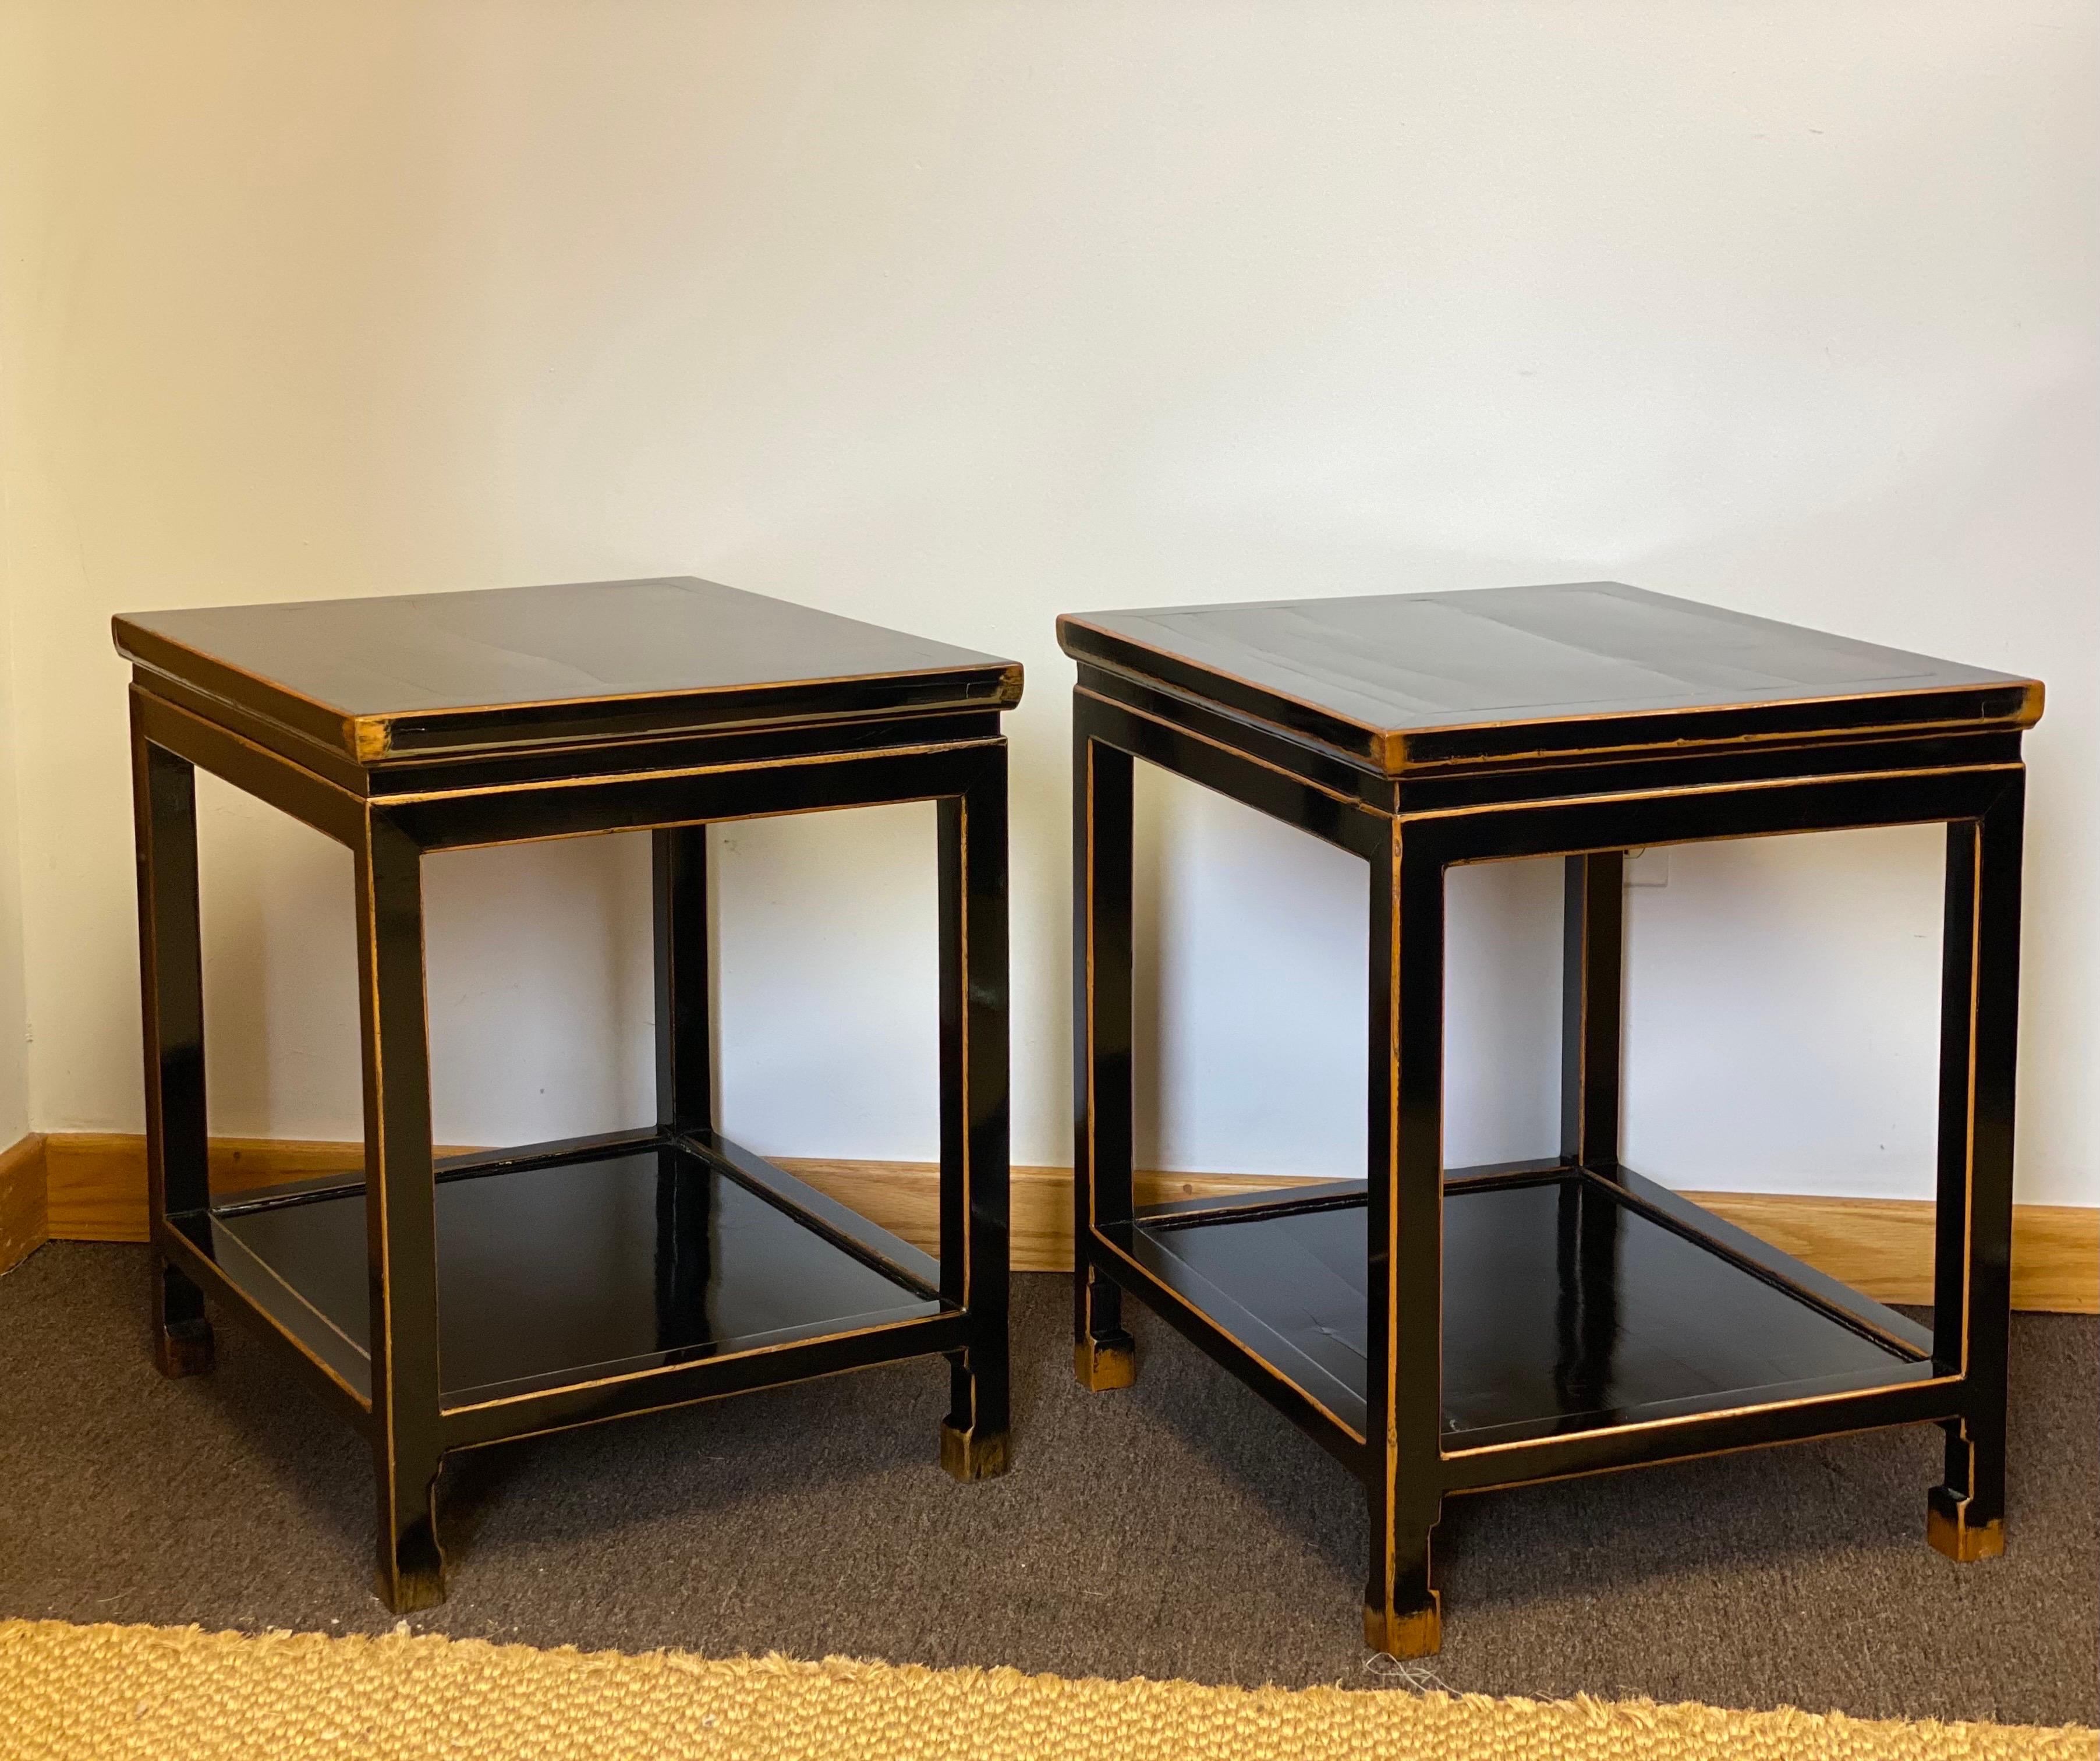 Hardwood Late 19th Century Chinese Black Lacquer Rectangular Two-Tier Side Tables, Pair